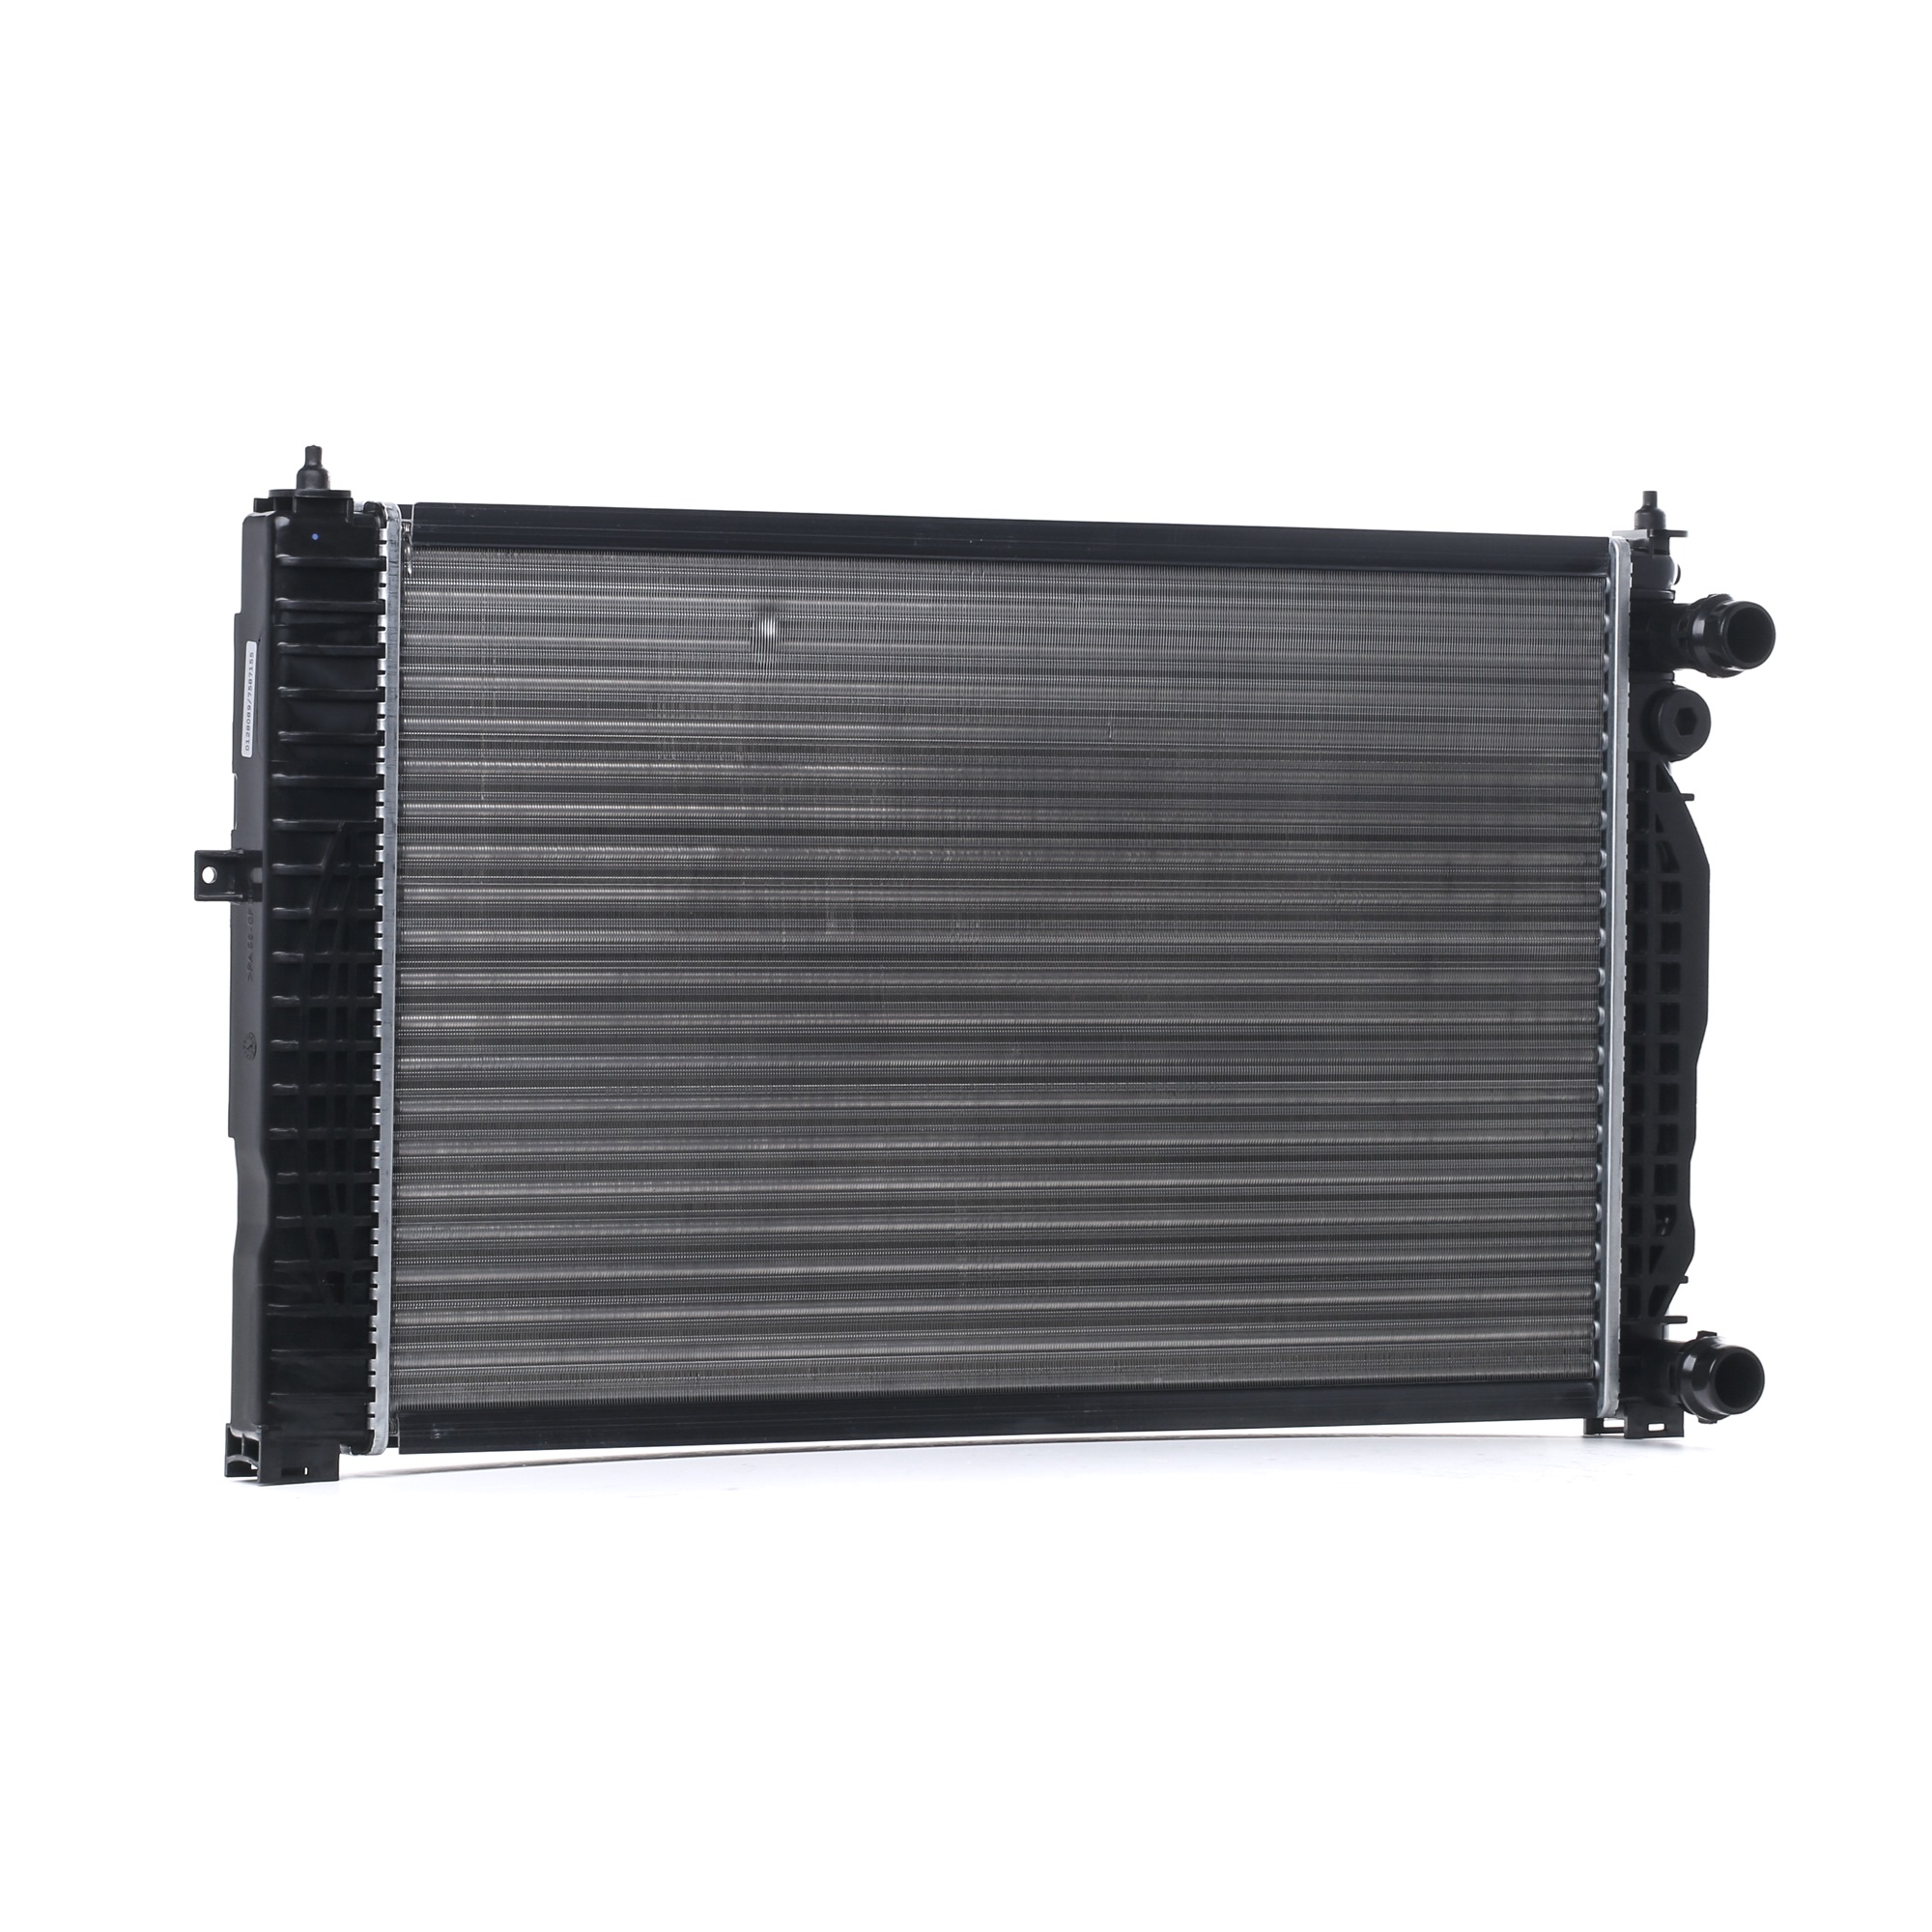 STARK SKRD-0120003 Engine radiator for vehicles with/without air conditioning, 632 x 398 x 32 mm, with screw, Manual Transmission, Mechanically jointed cooling fins